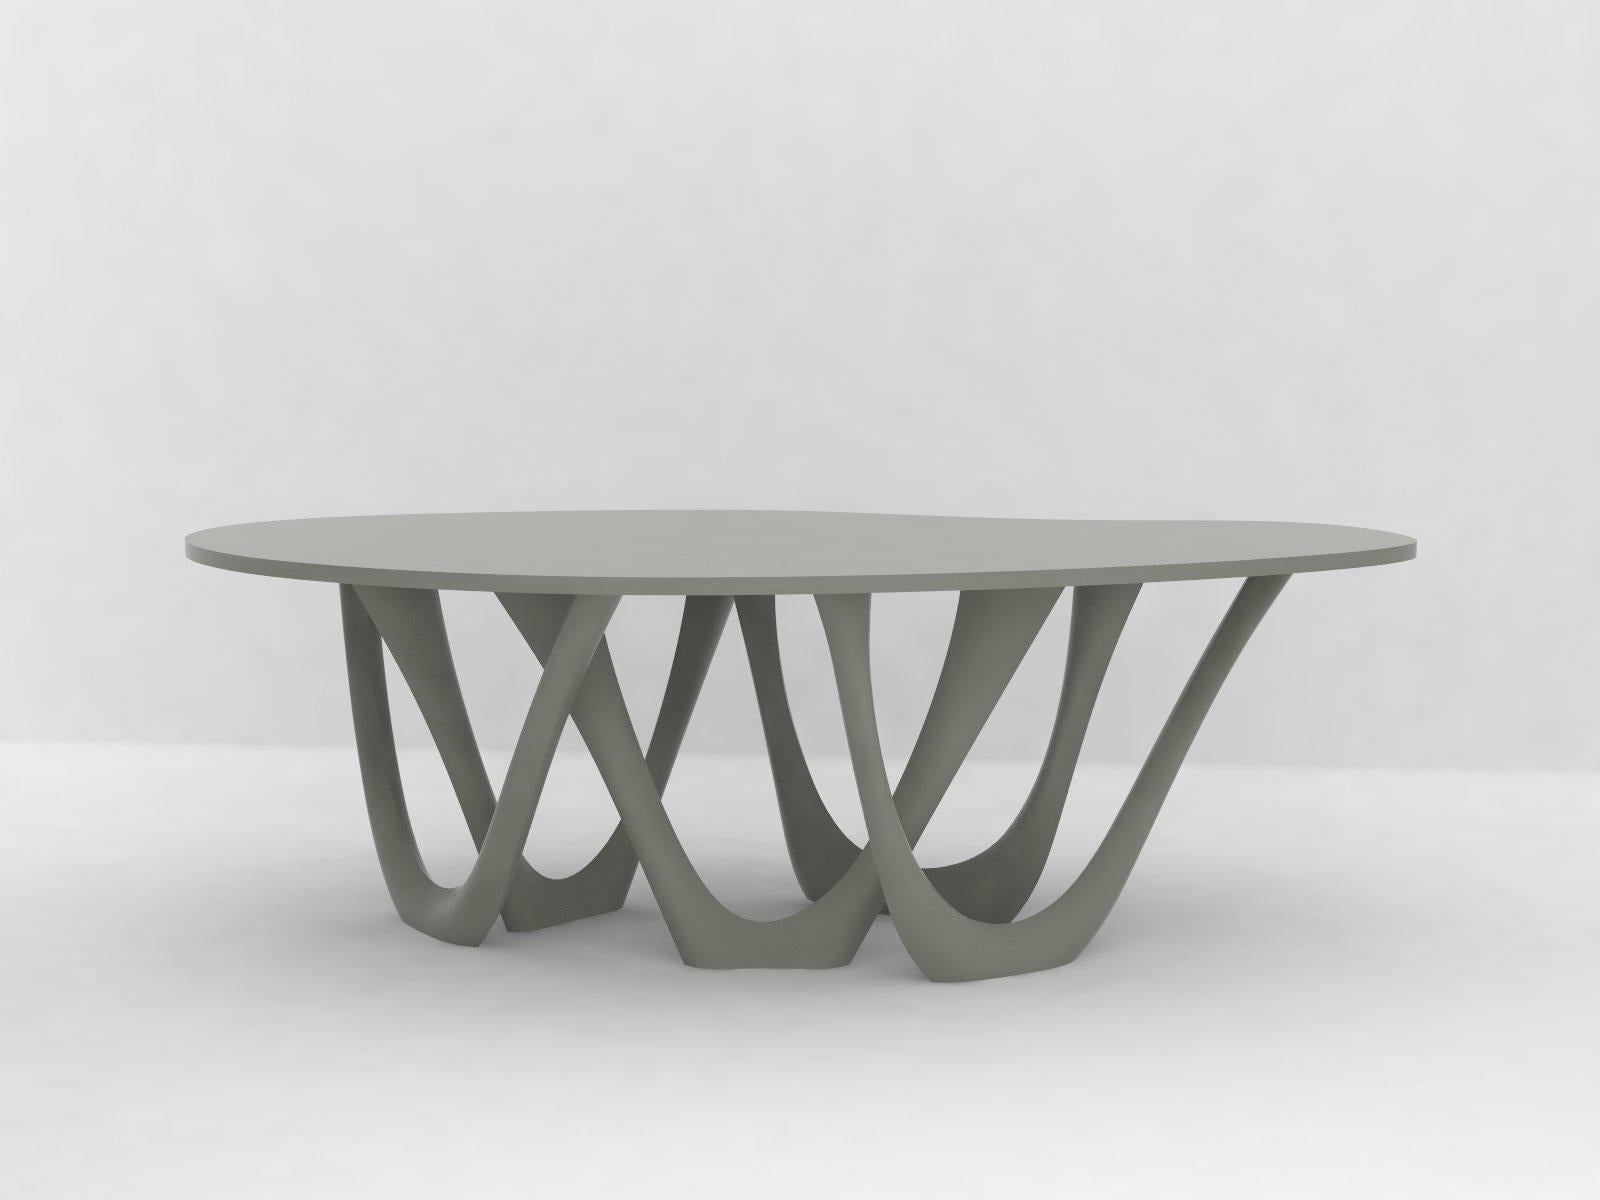 G-Table B+C in Powder-Coated Aluminum with Concrete Top by Zieta In Excellent Condition For Sale In New York, NY